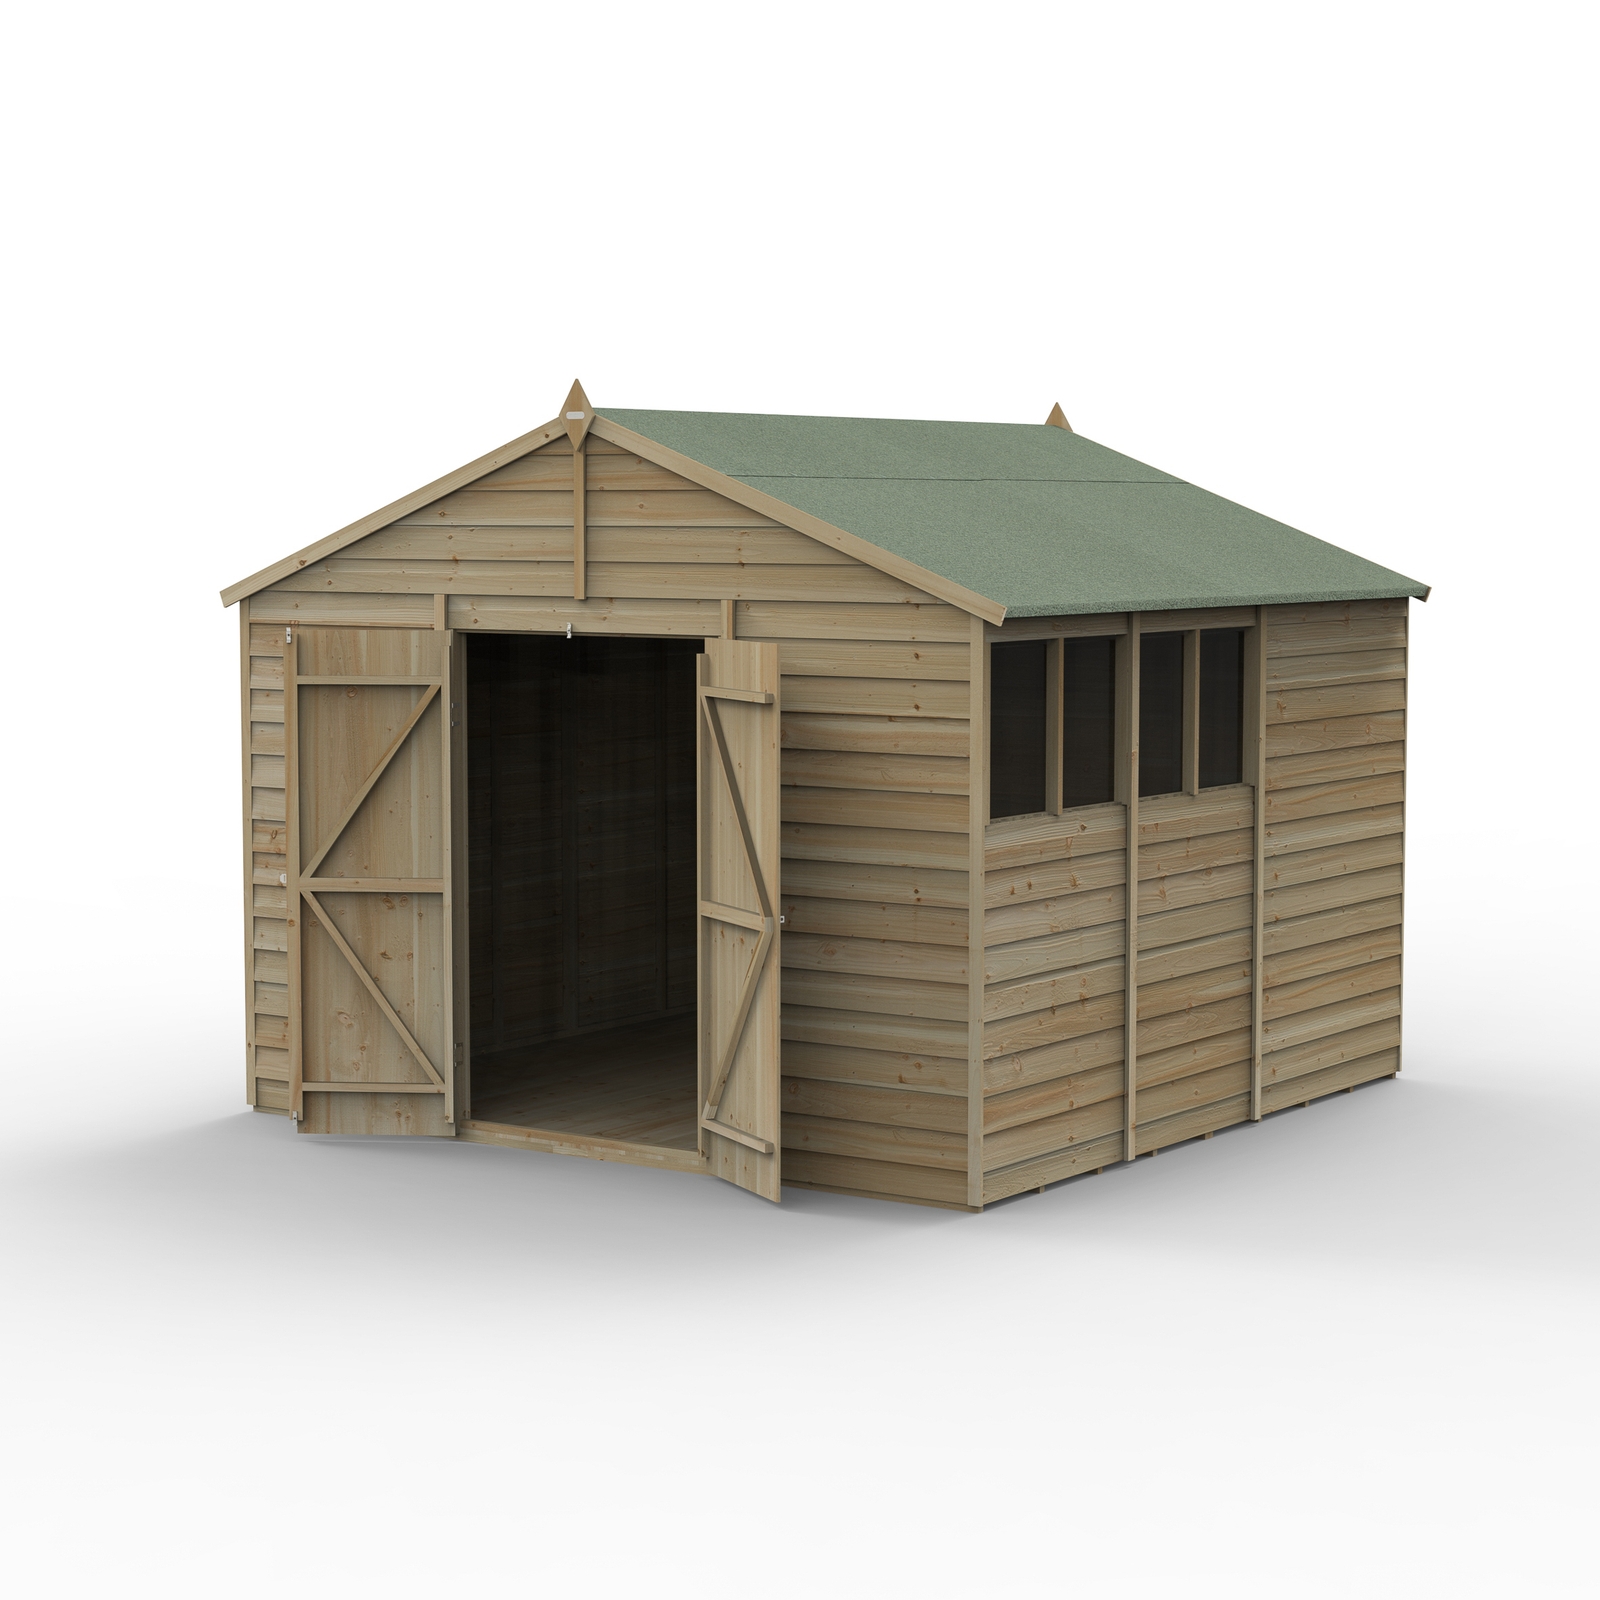 Forest Garden 4LIFE Apex Shed 10 x 10ft - Double Door 4 Window (Home Delivery)